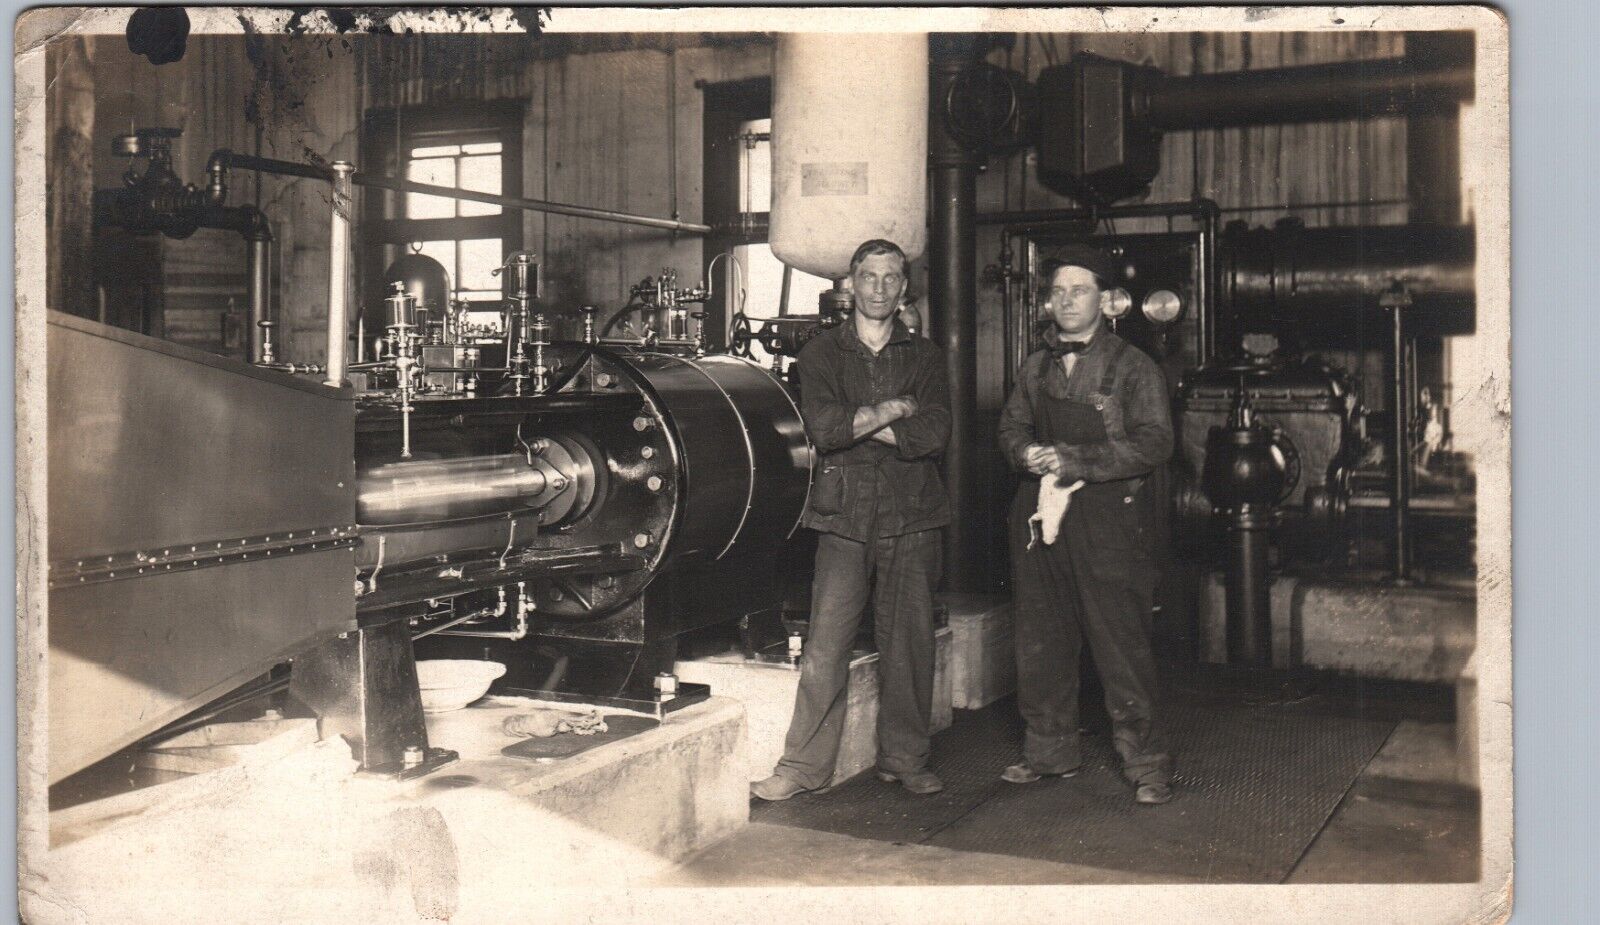 STATIONARY ENGINE OR TURBINE real photo postcard rppc factory mill power plant